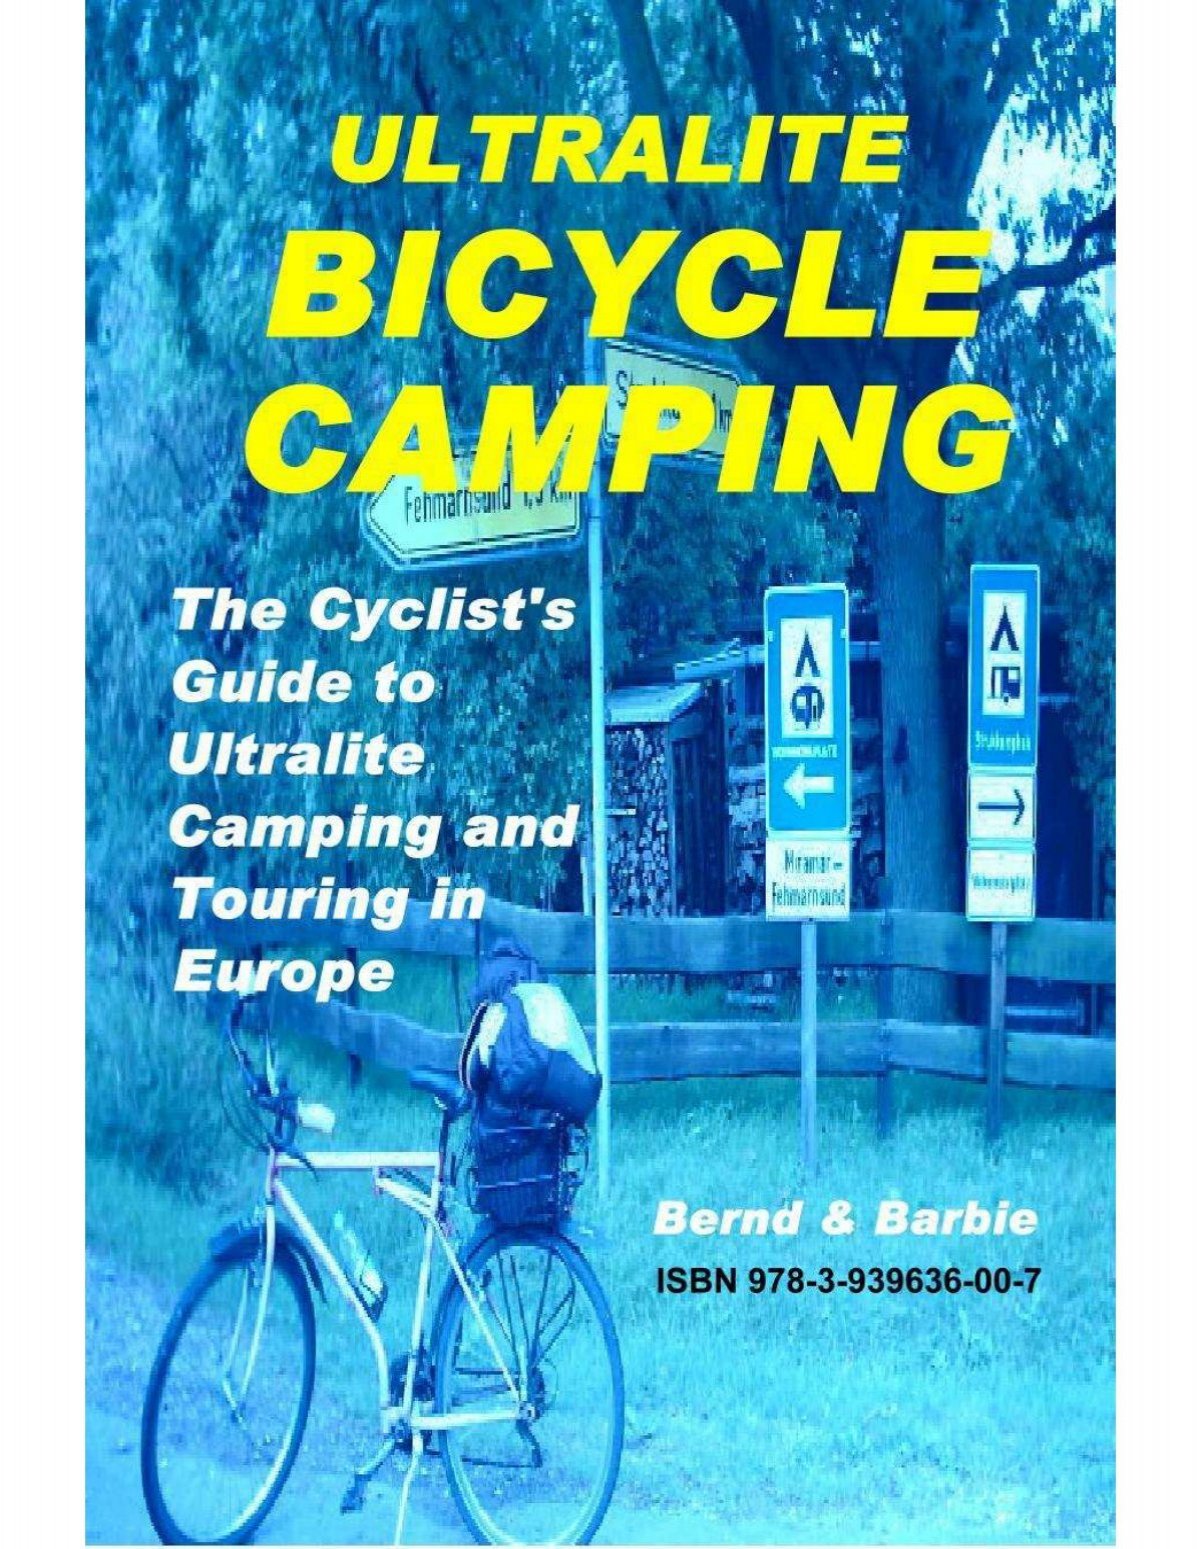 Ultralite Bicycle Camping - e-book - Bicycle Touring Pro